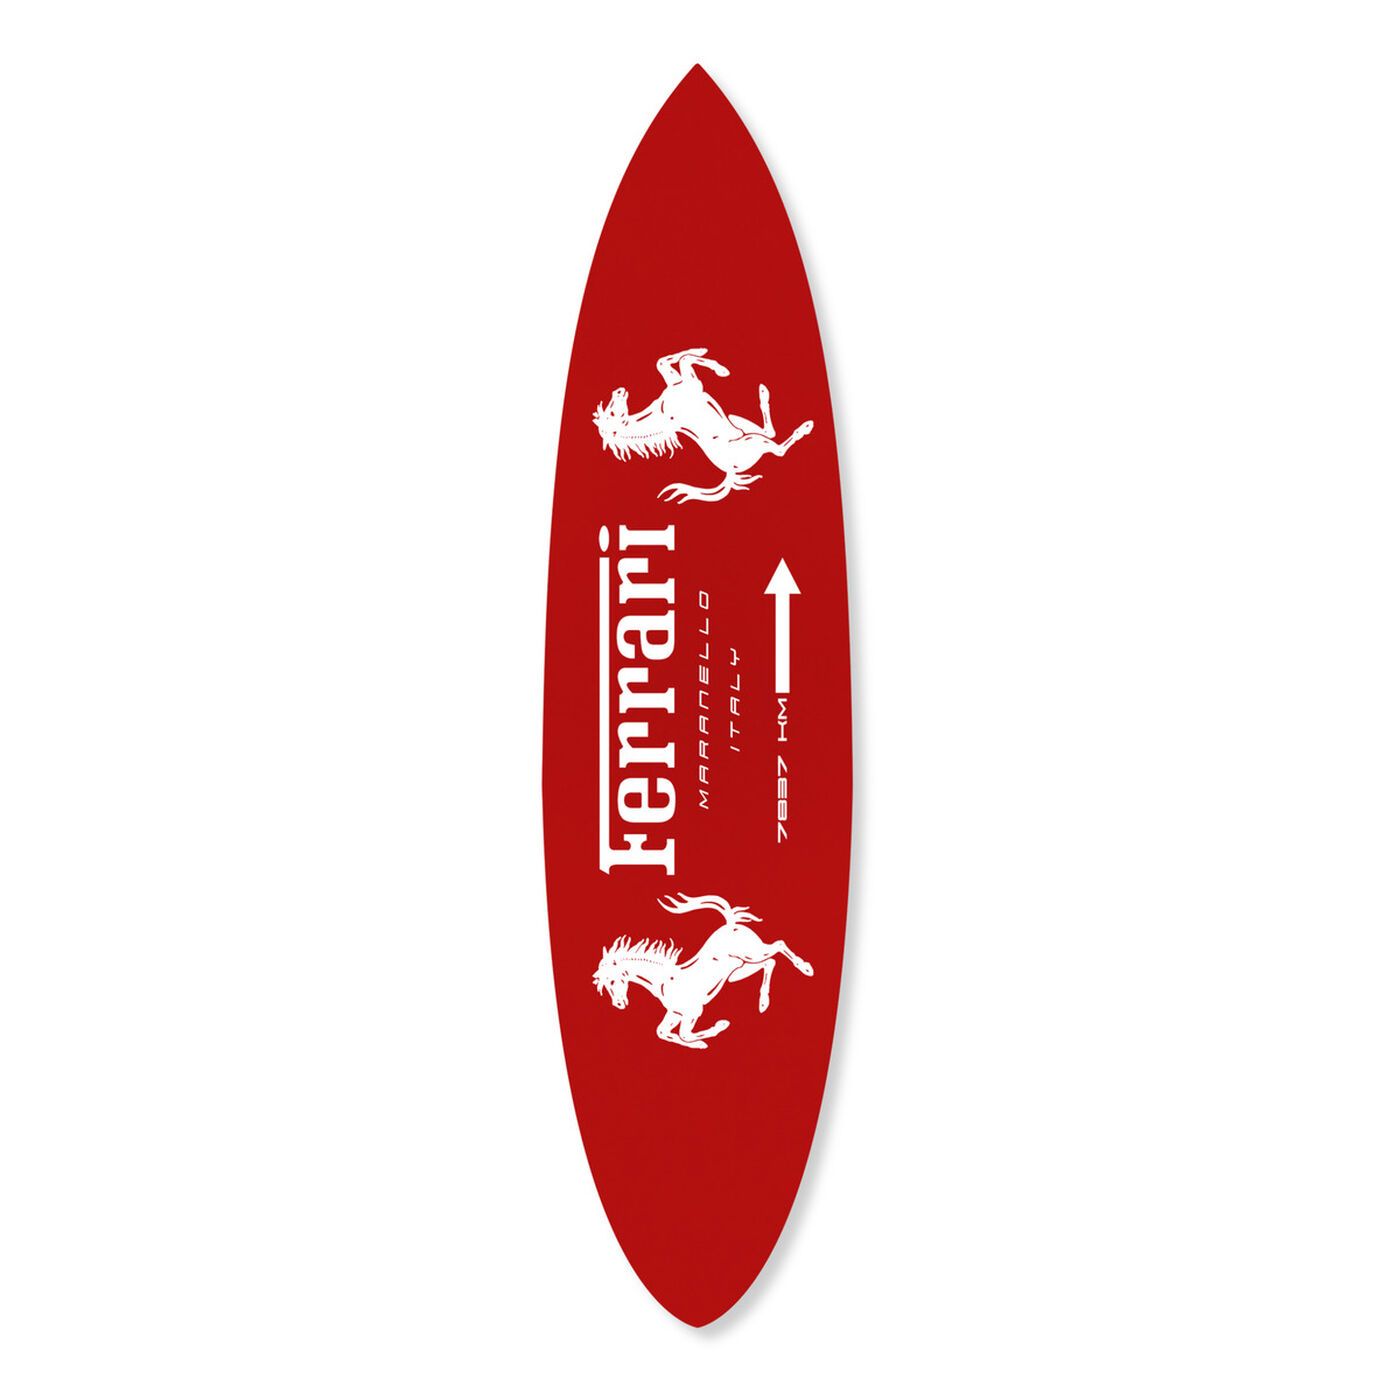 Cavalleria Rossa Road Sign Surfboard | Sports and Teams Wall Art by The Oliver Gal | Oliver Gal